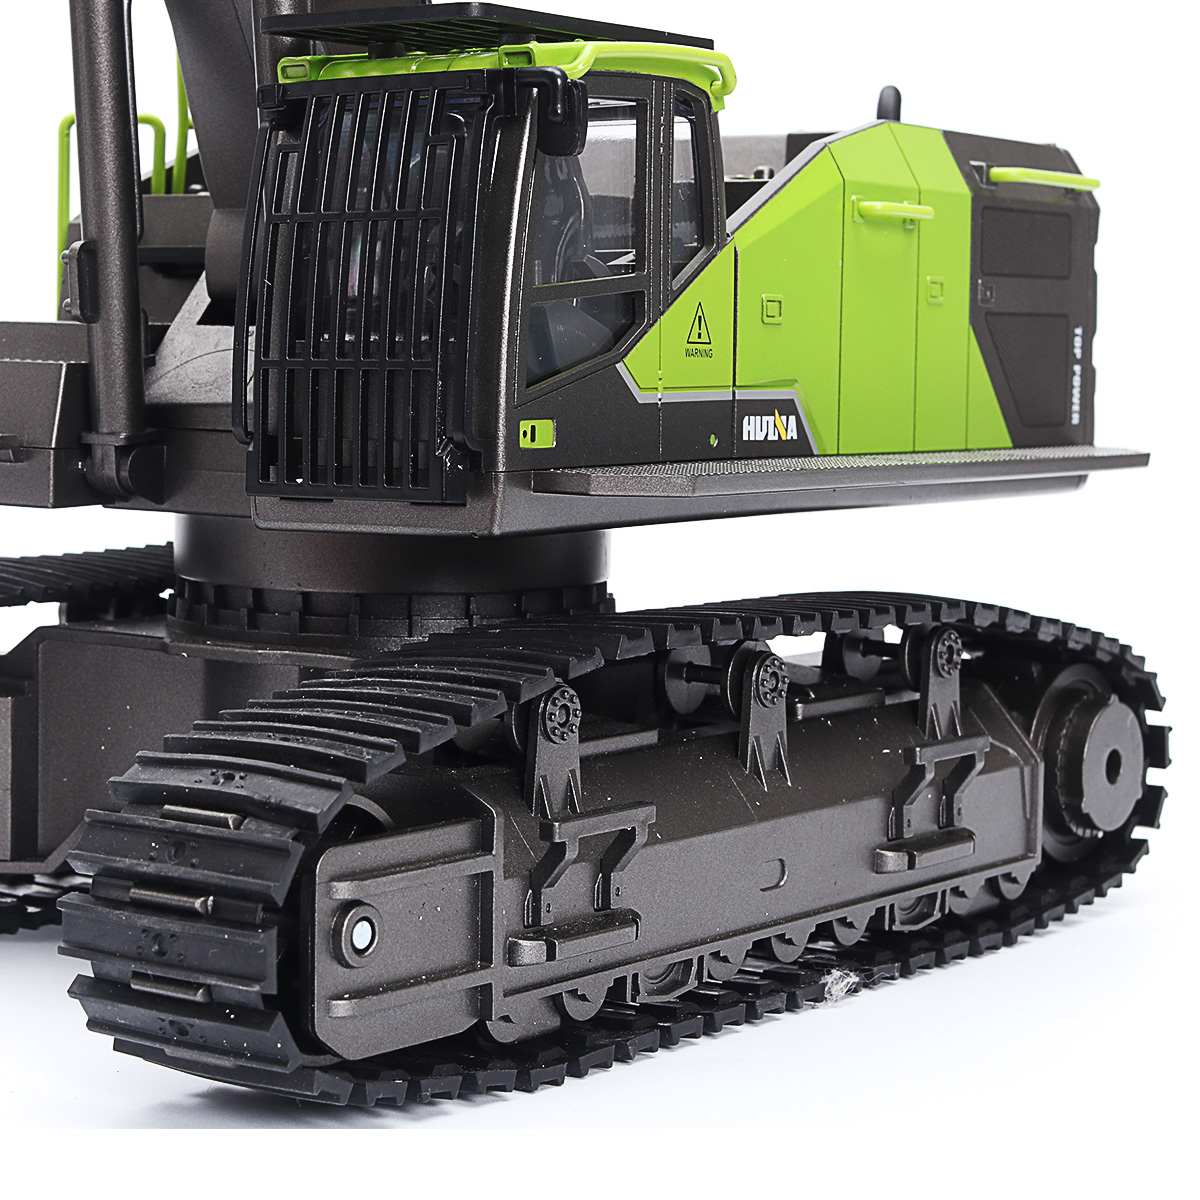 Newest model Huina 1593 Cost Effective 1:14 Scale 22 Channels 2.4GHz RC Excavator for over 8 year olds for EU/AU/US/CA ONLYOrigin:United States,Type:Green